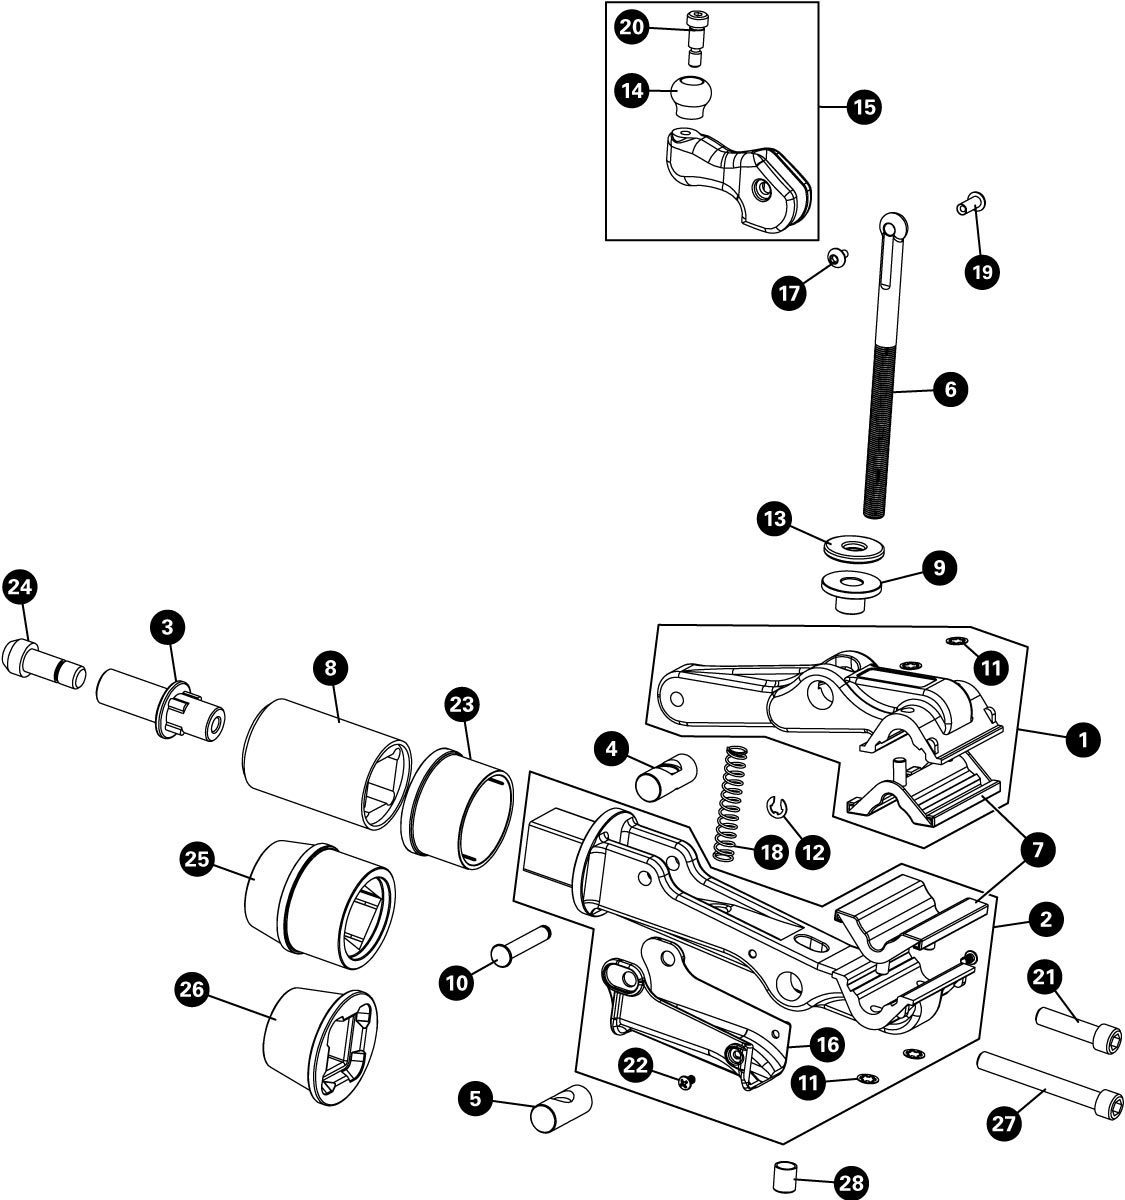 Parts diagram for 100-25D Professional Micro-Adjust Clamp, click to enlarge